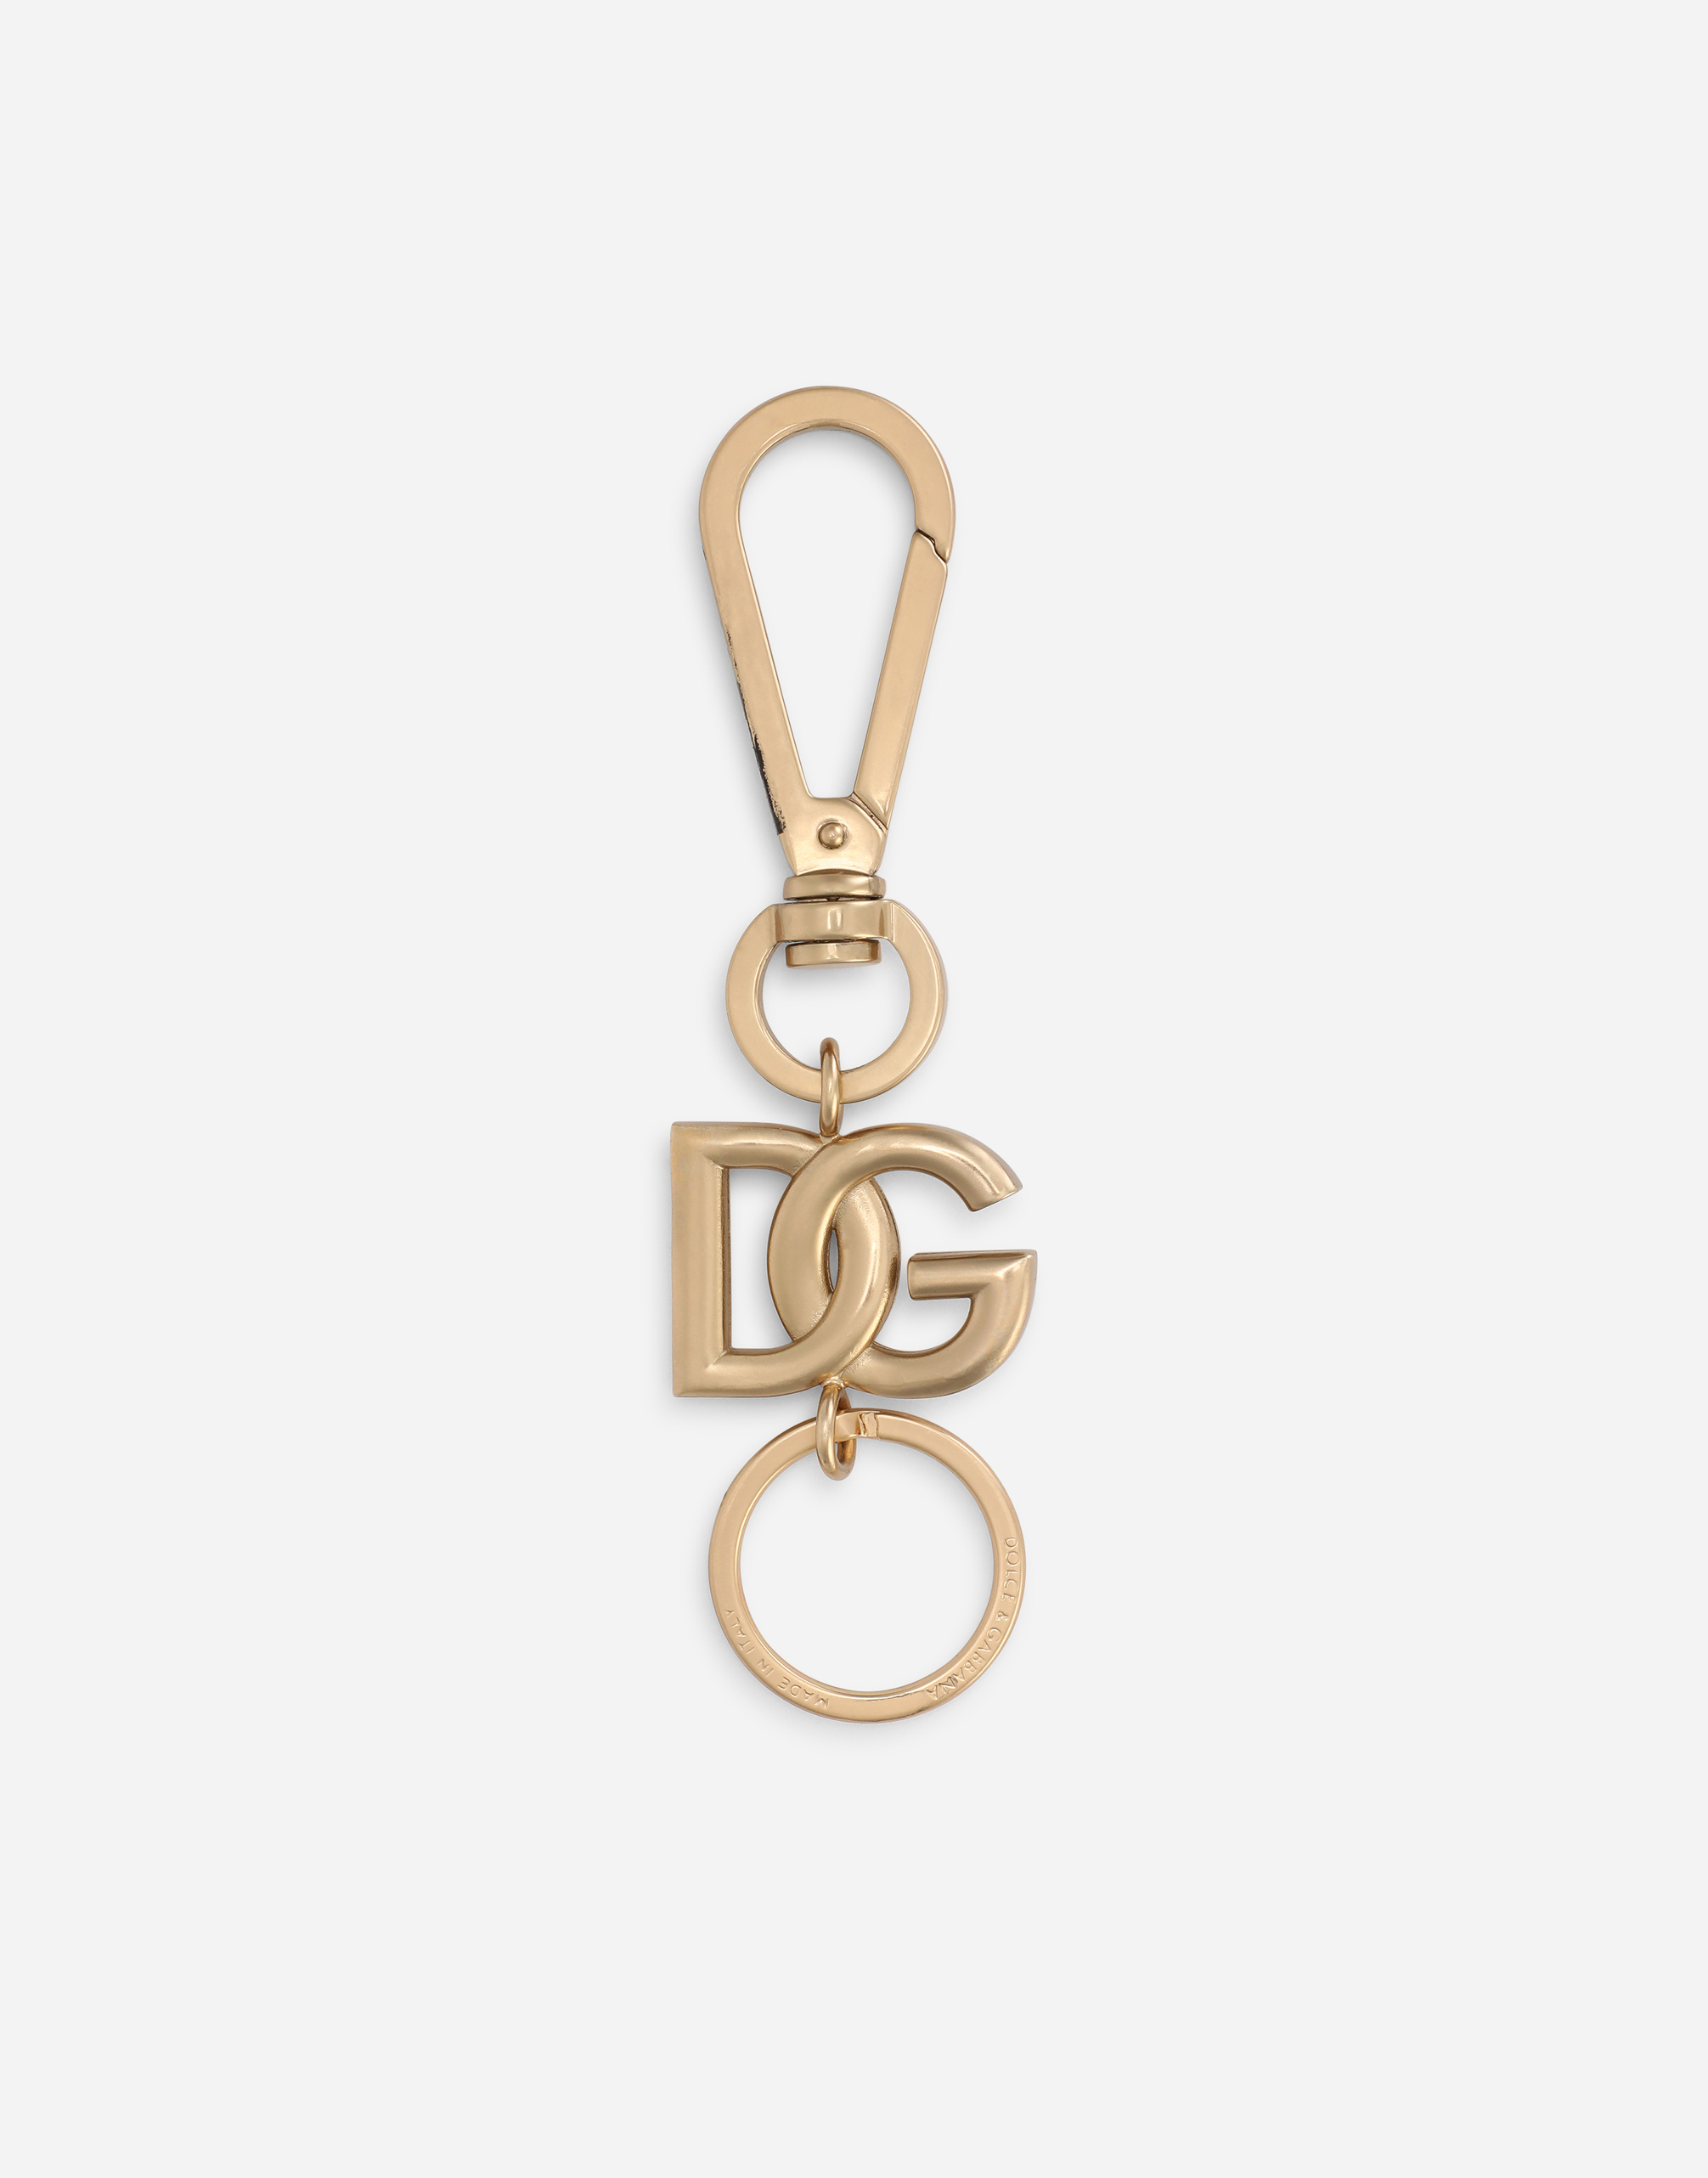 Metal keychain with DG logo in Gold